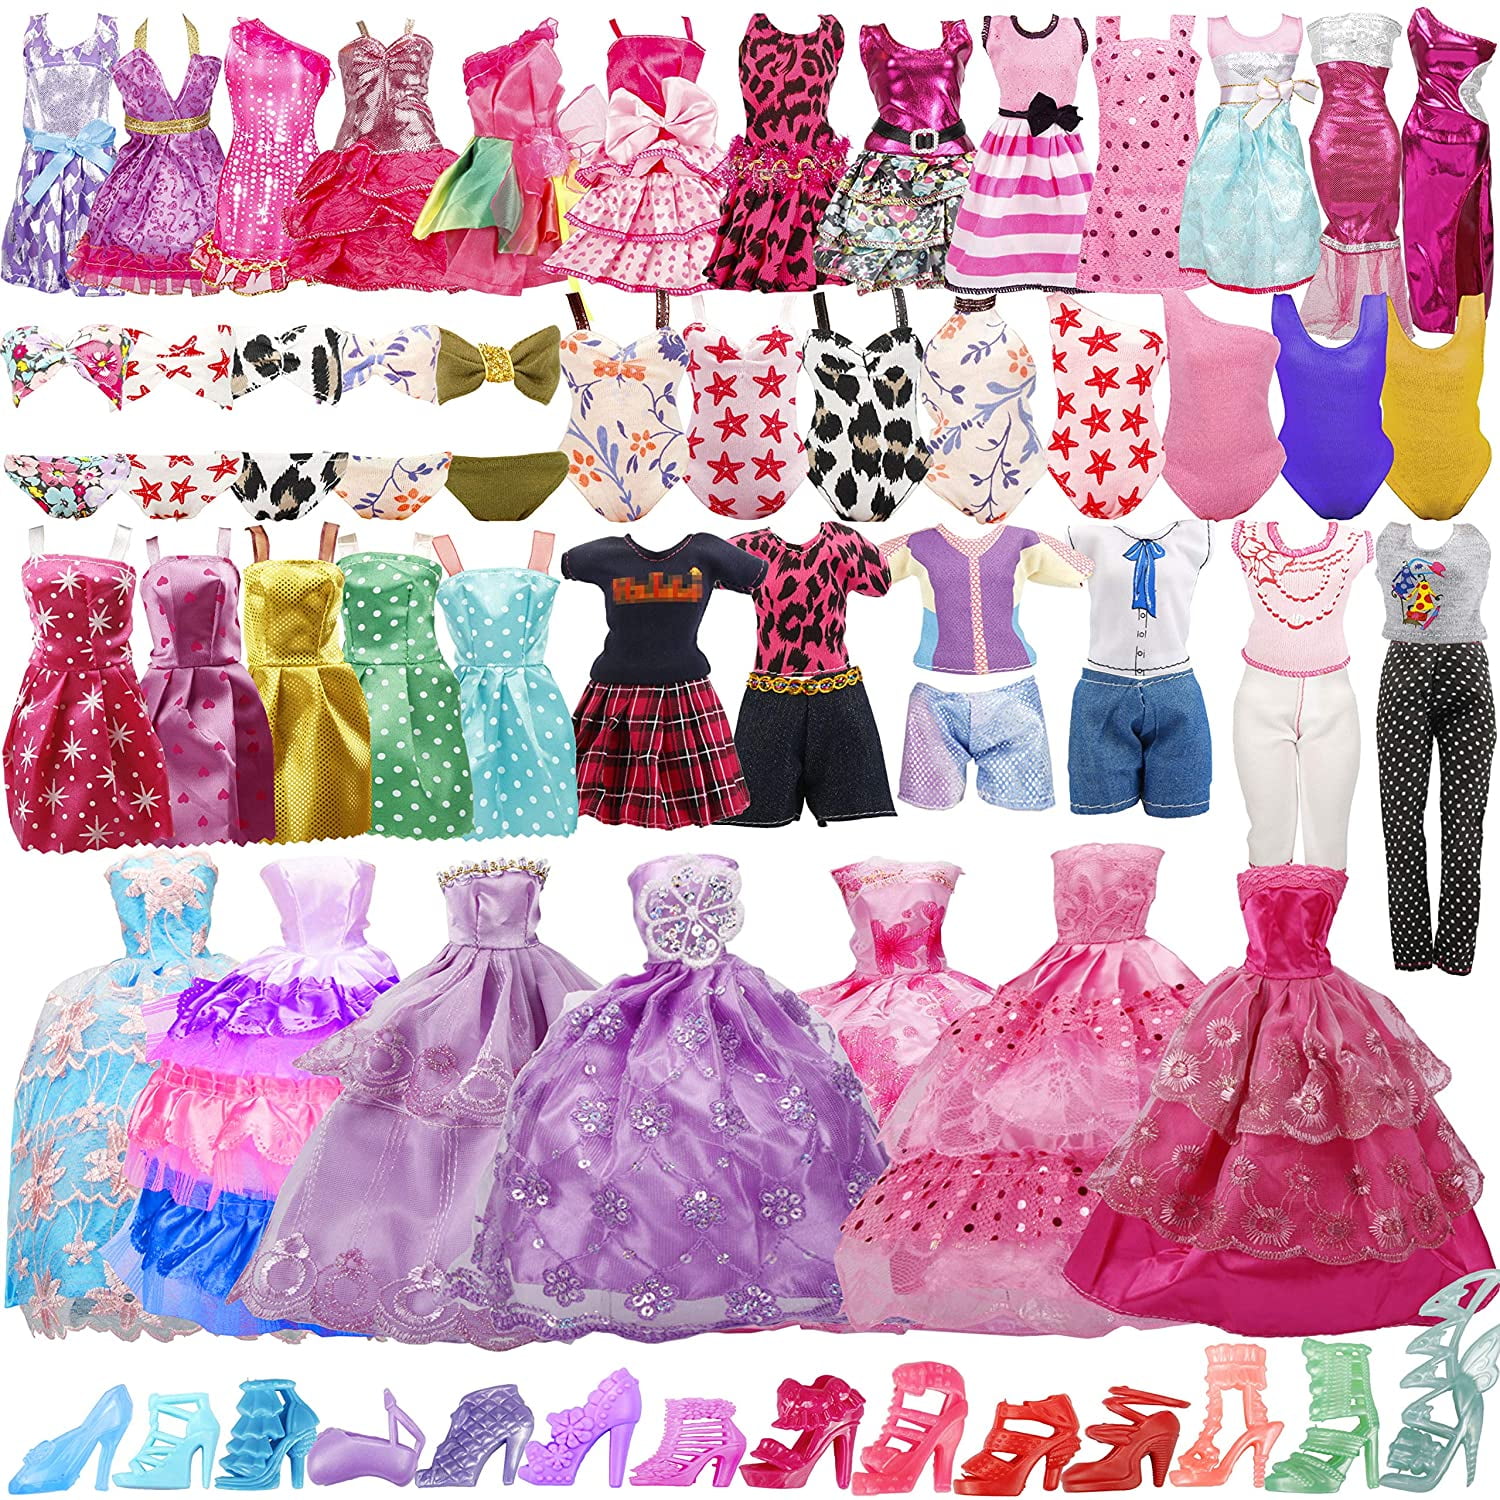 35 Pack Handmade Doll Clothes Including 5 Wedding Gown Dresses 5 Fashion  Dresses 4 Braces Skirt 3 Tops and Pants 3 Bikini Swimsuits 15 Shoes for Doll  and Other11.5 Inch Dolls 